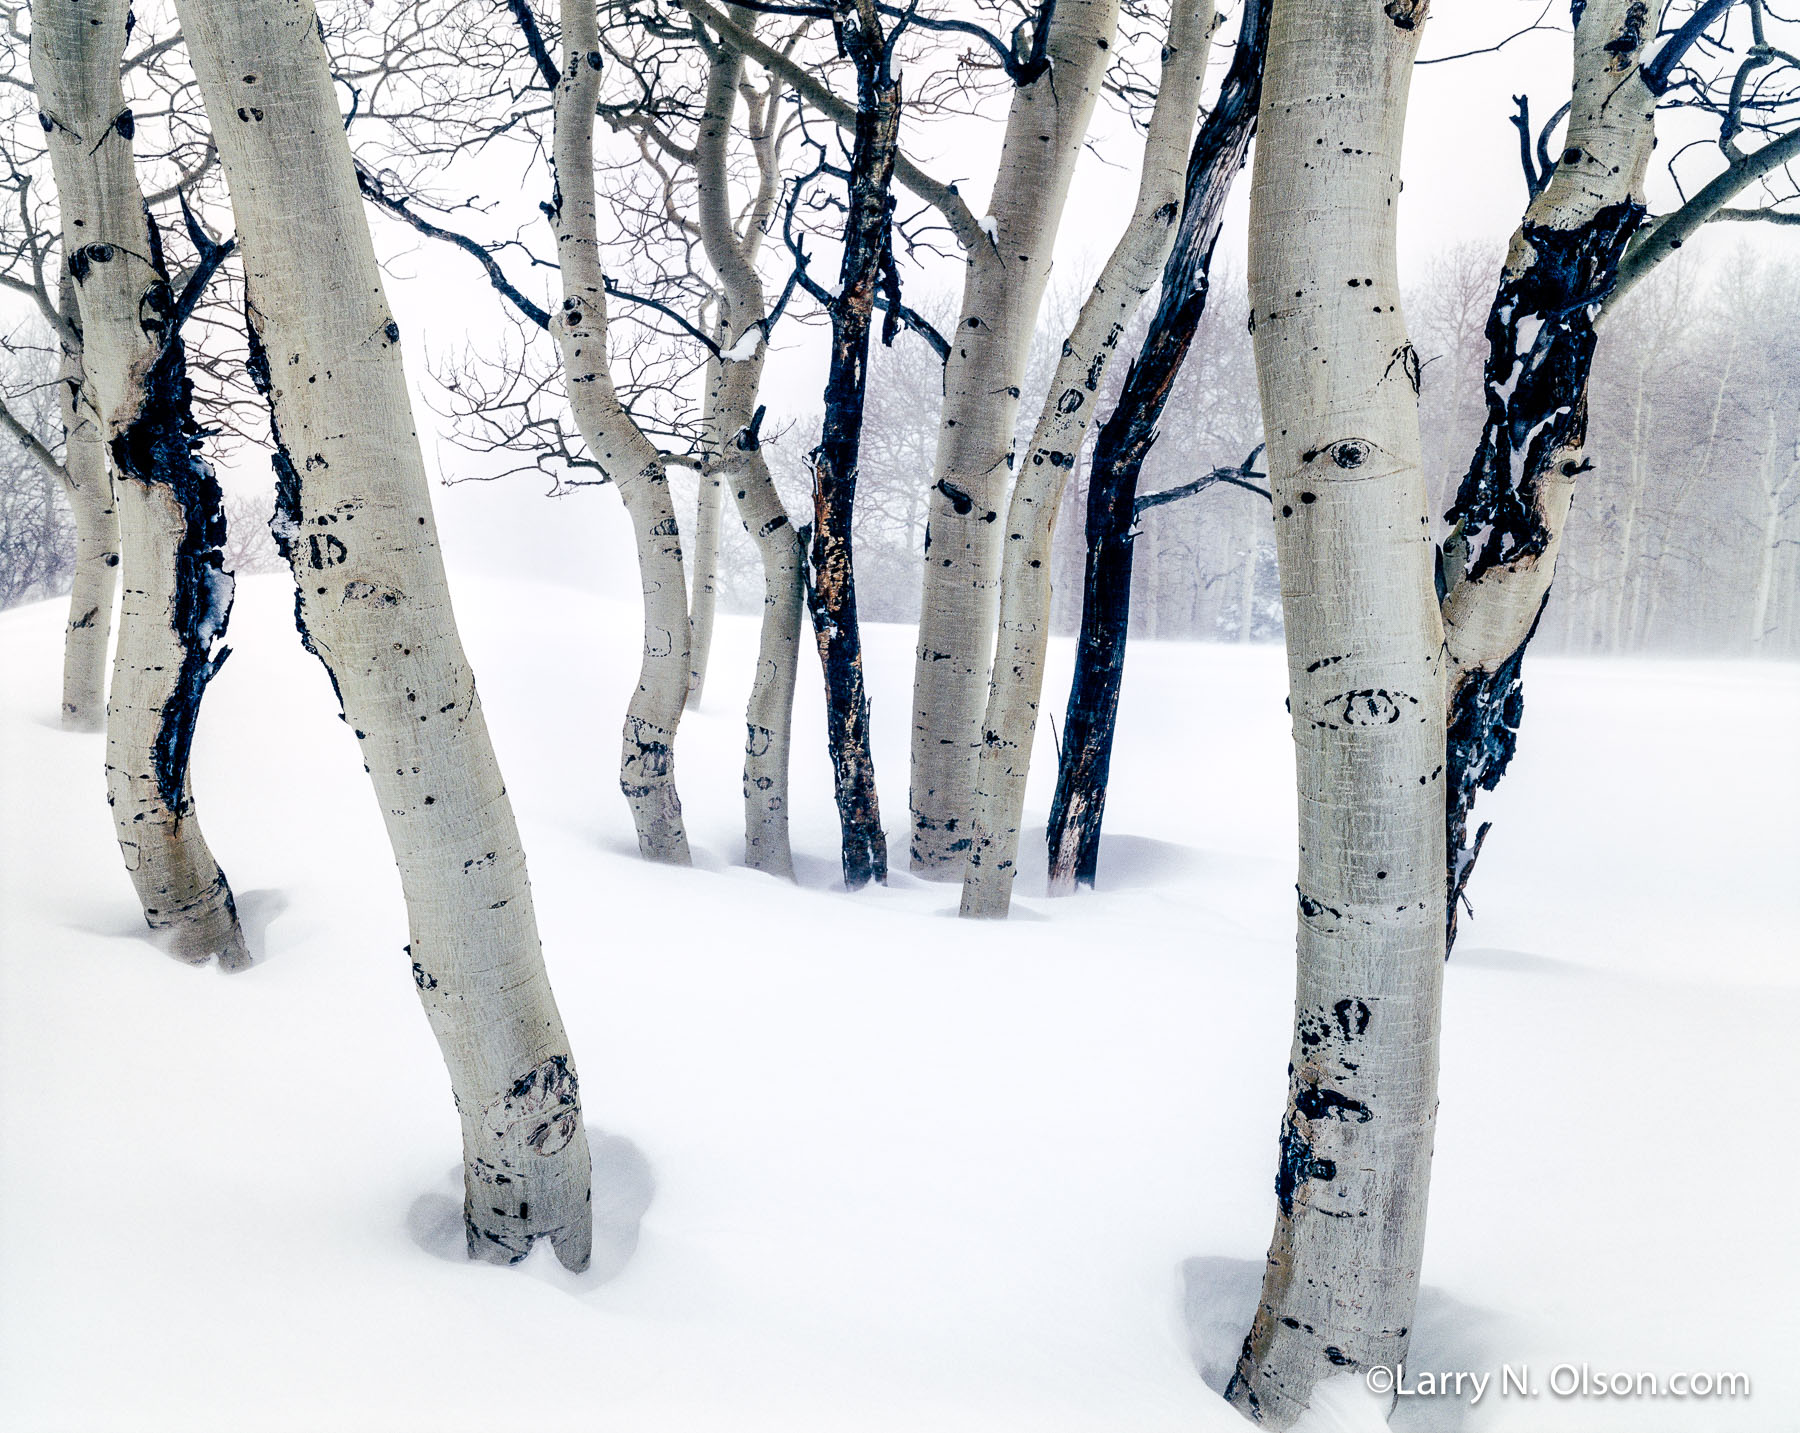 Aspen Grove, Wasatch Mountains, Utah | Aspen trees huddle together against winter snows.